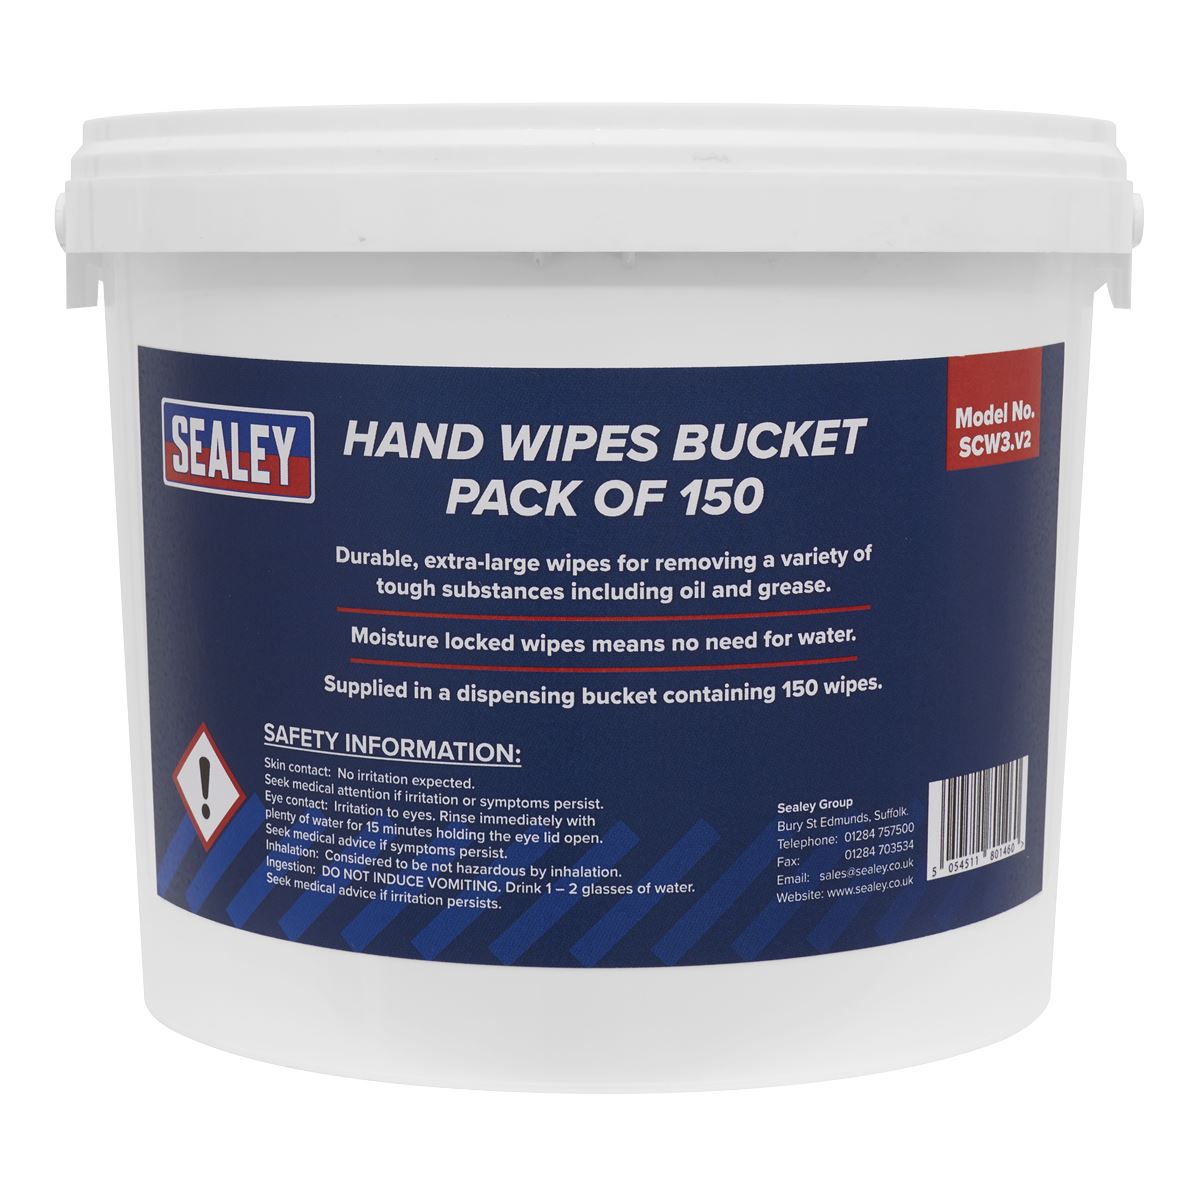 Sealey Hand Wipes Bucket - Pack of 150